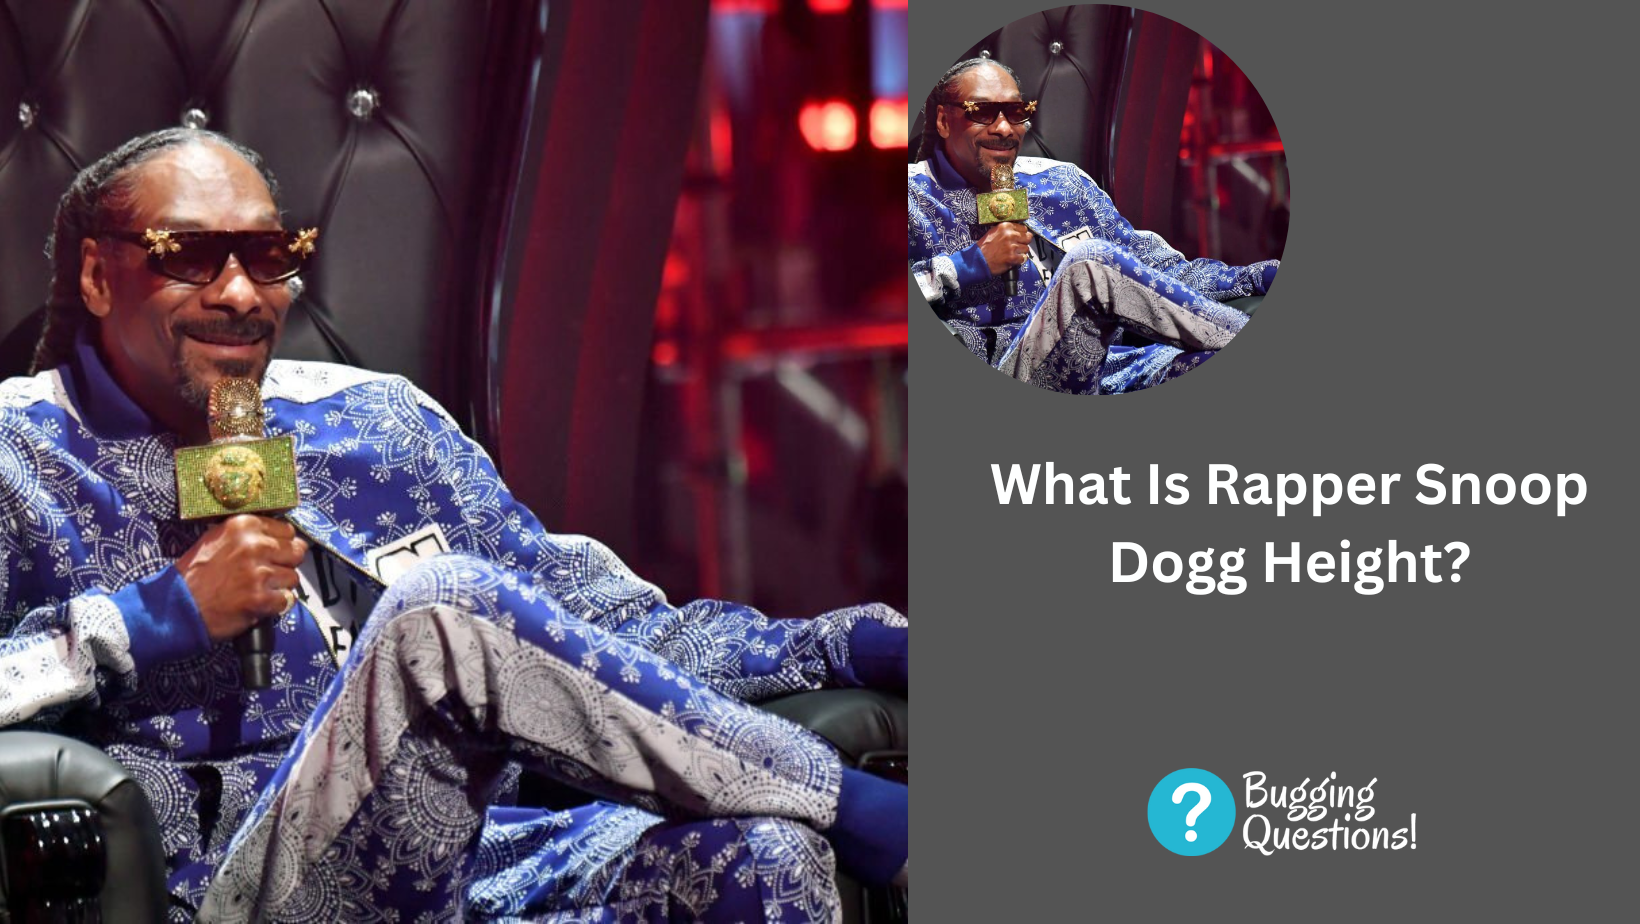 What Is Rapper Snoop Dogg Height?